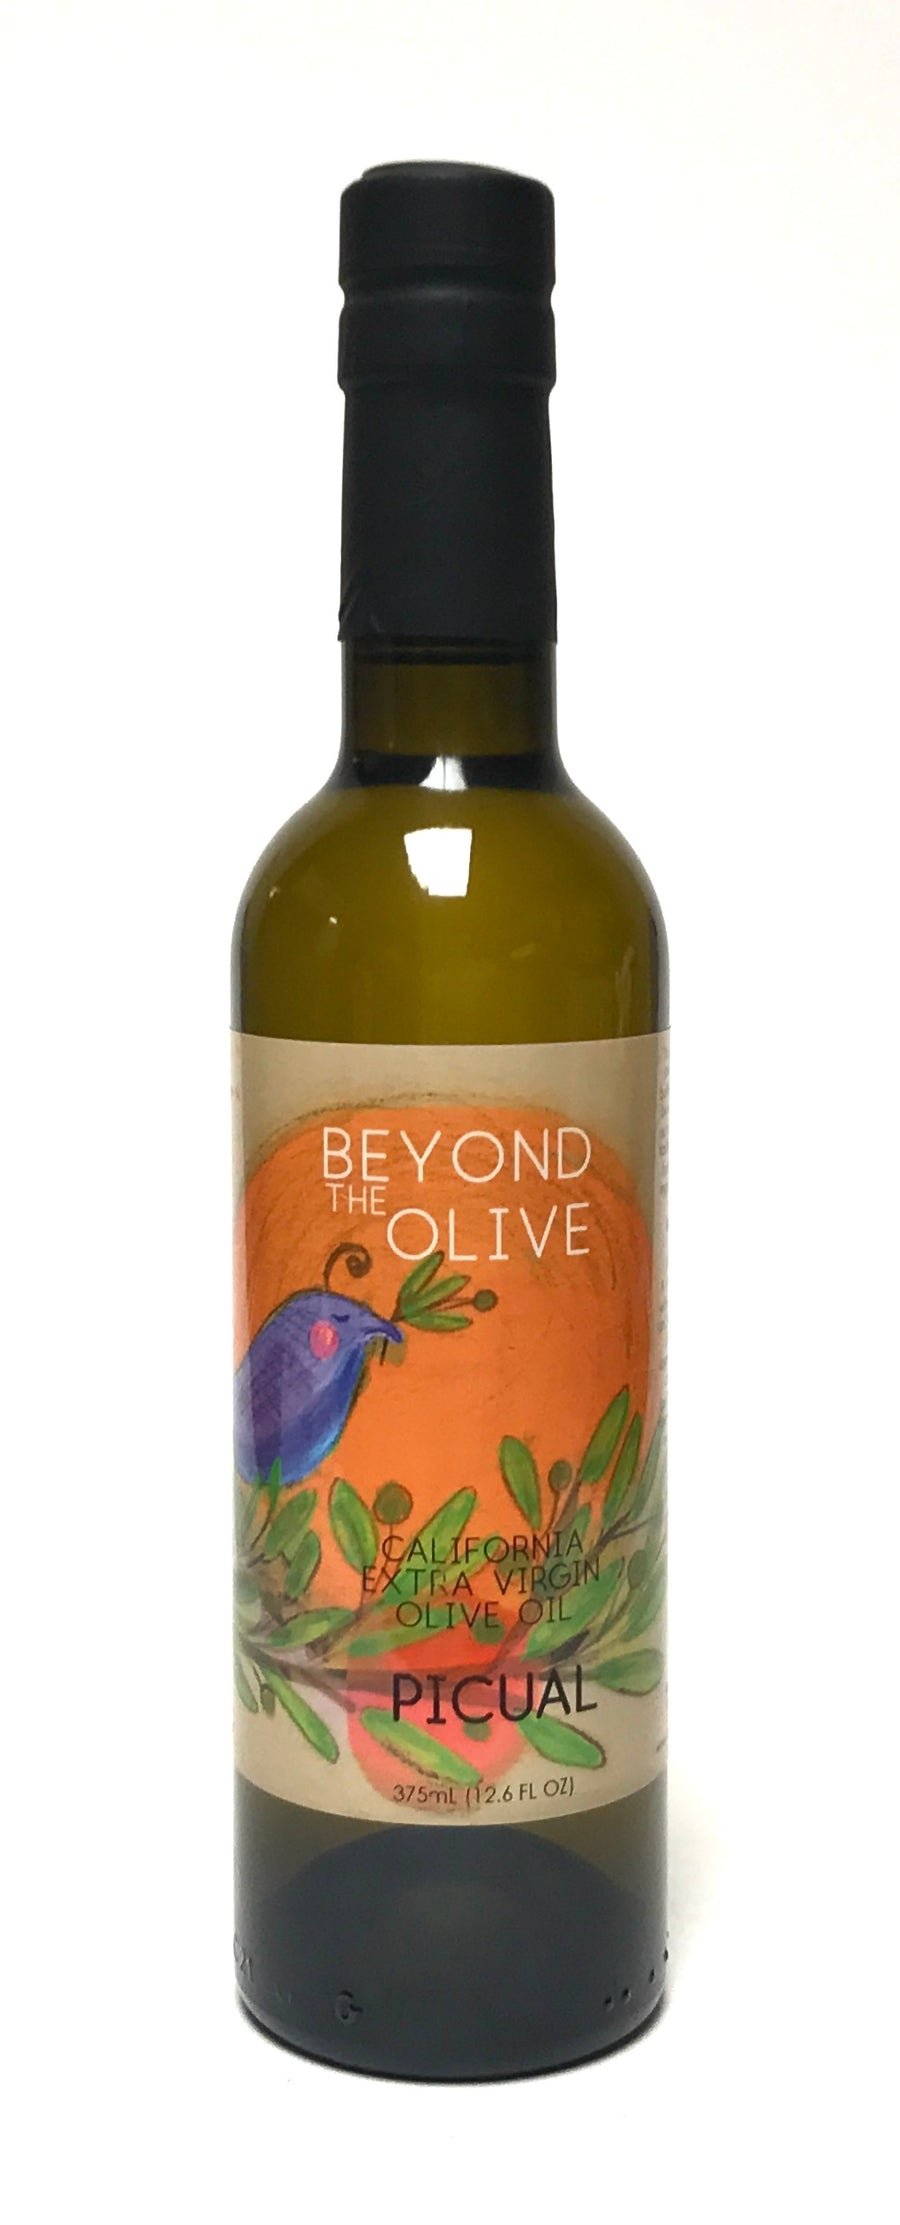 Beyond the Olive Picual EVOO Olive Oil 250ml